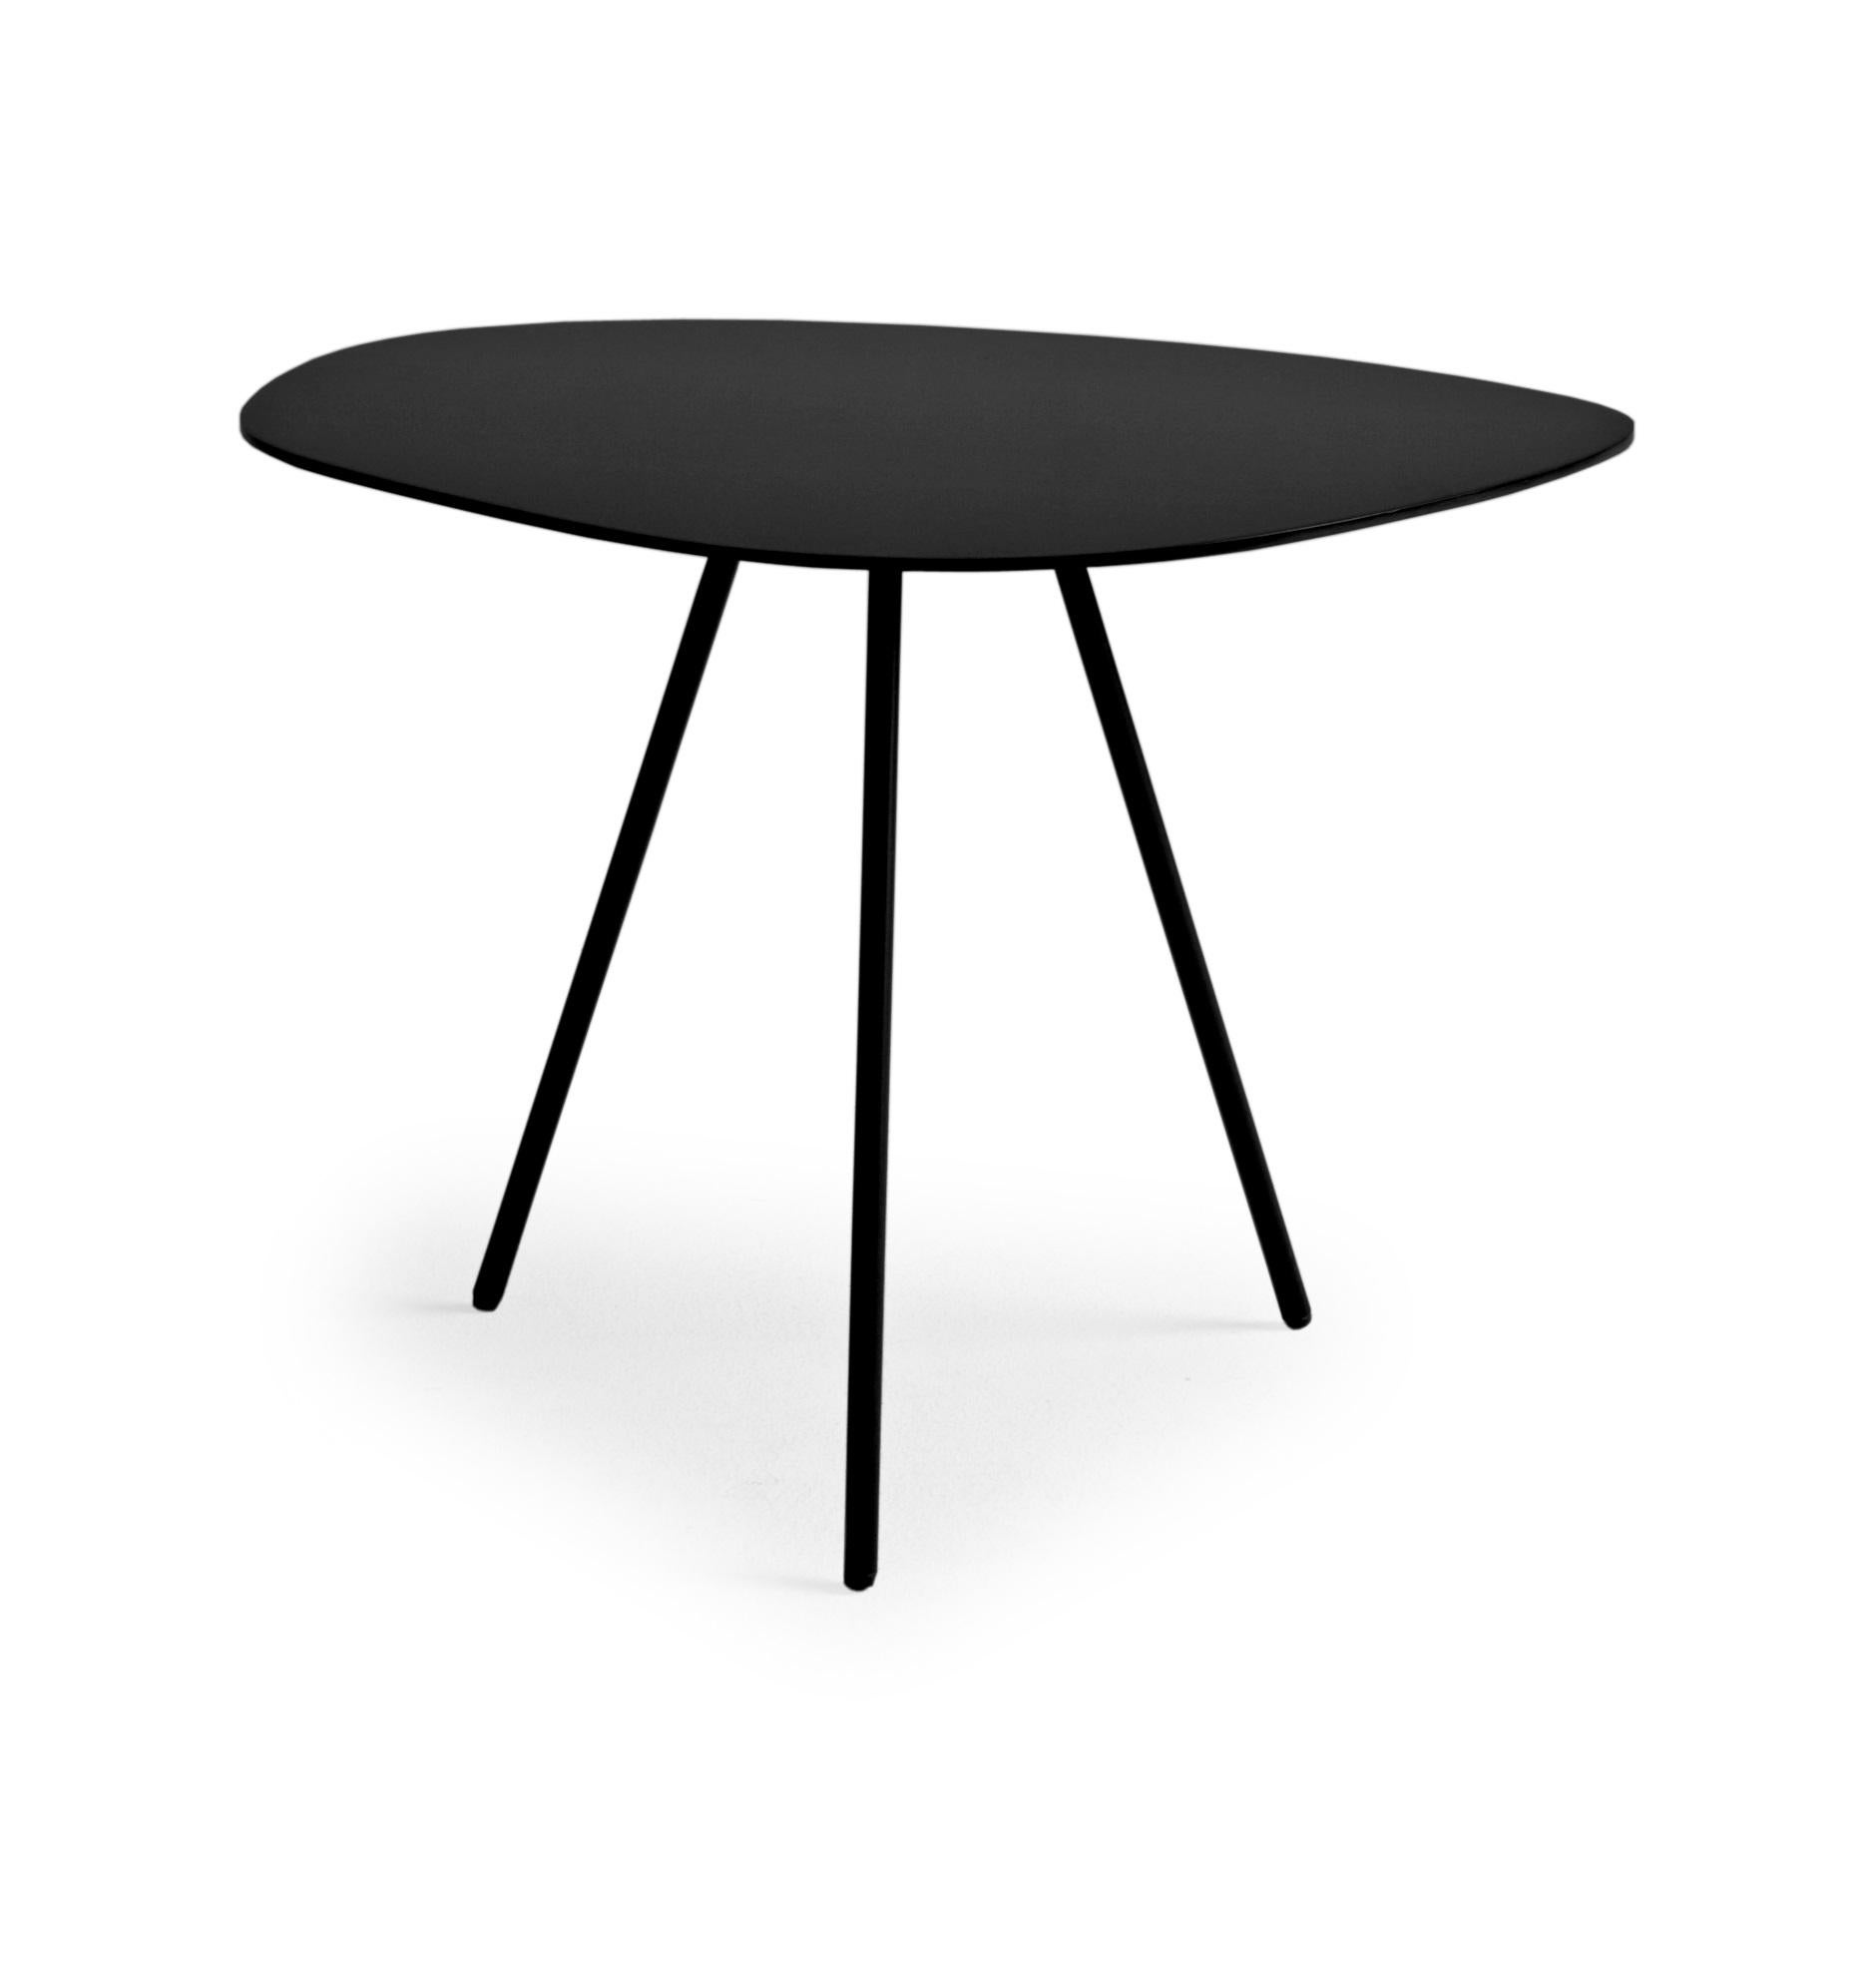 Black small pebble coffee table by Kenneth Cobonpue.
Materials: Black, sapele, steel. 
Also available in other colors and for outdoors. 
Dimensions: 43 cm x 54 cm x H 40 cm 

Pebble playfully echoes shapes found in nature like stepping-stones